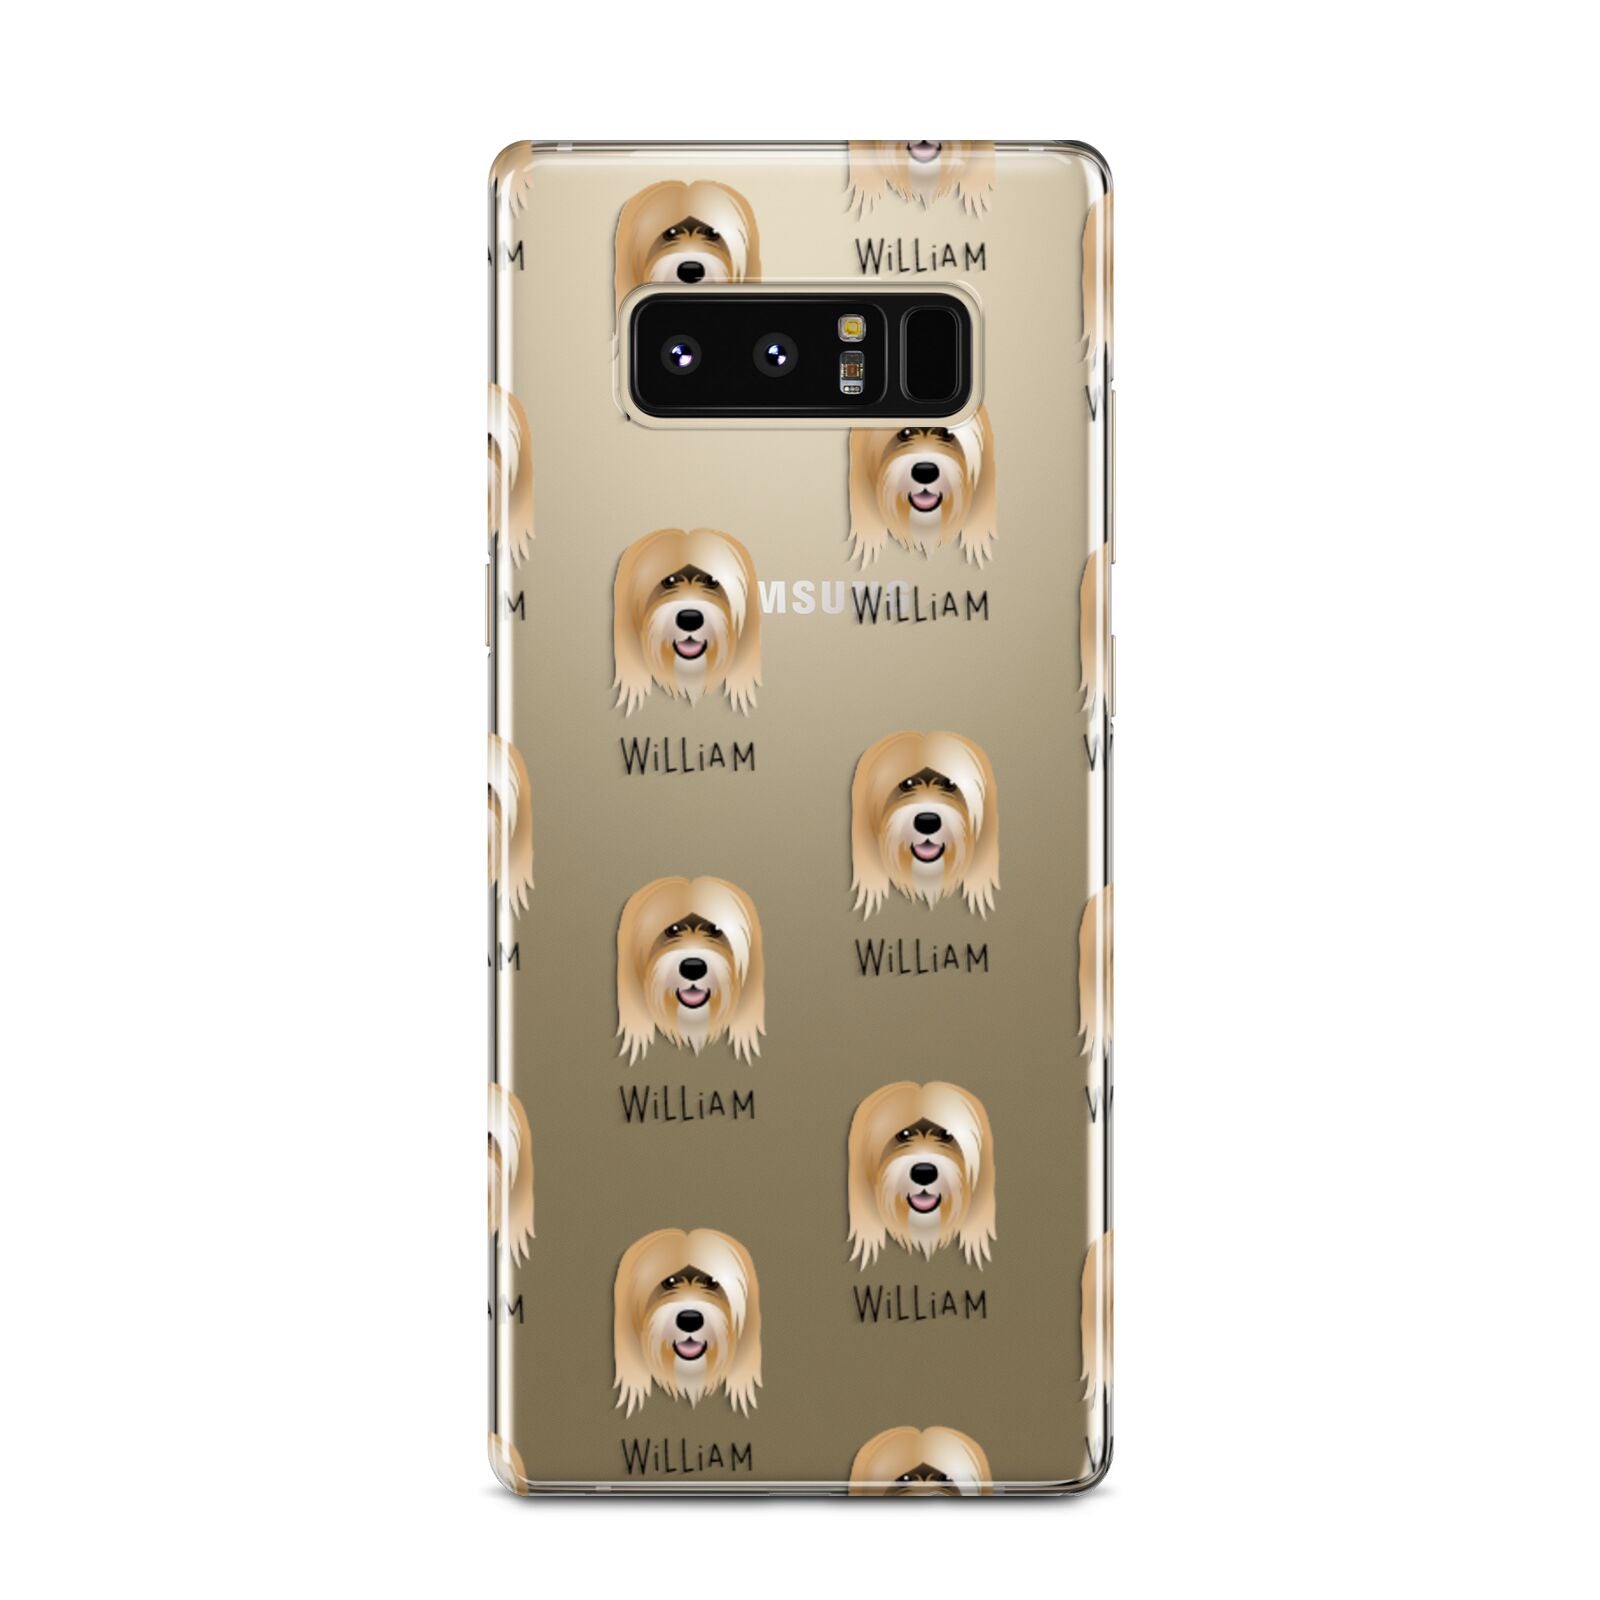 Tibetan Terrier Icon with Name Samsung Galaxy Note 8 Case